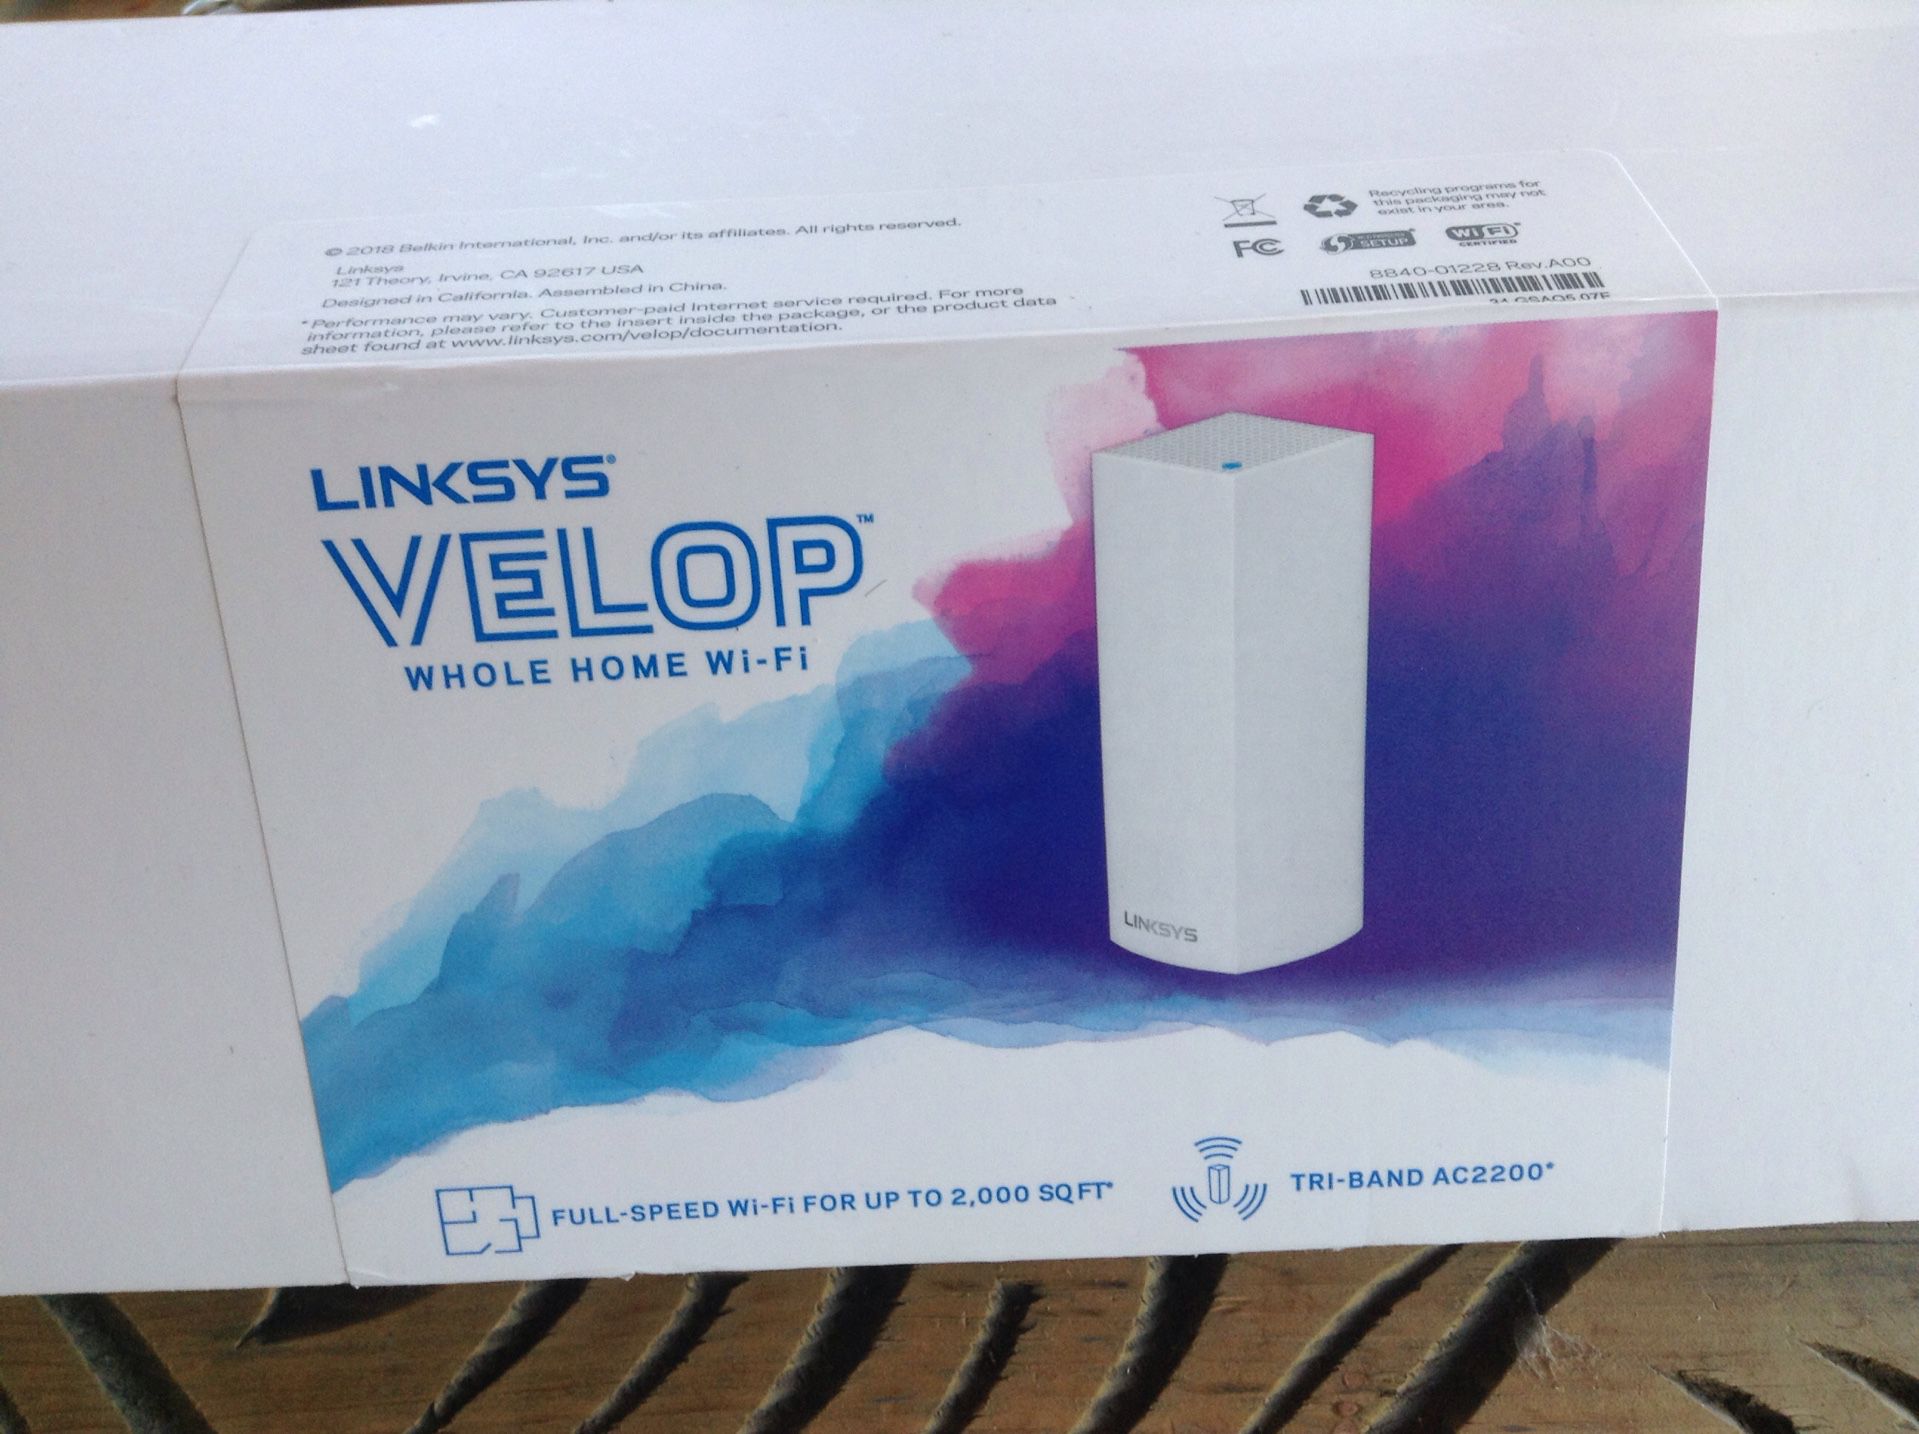 New linksys router